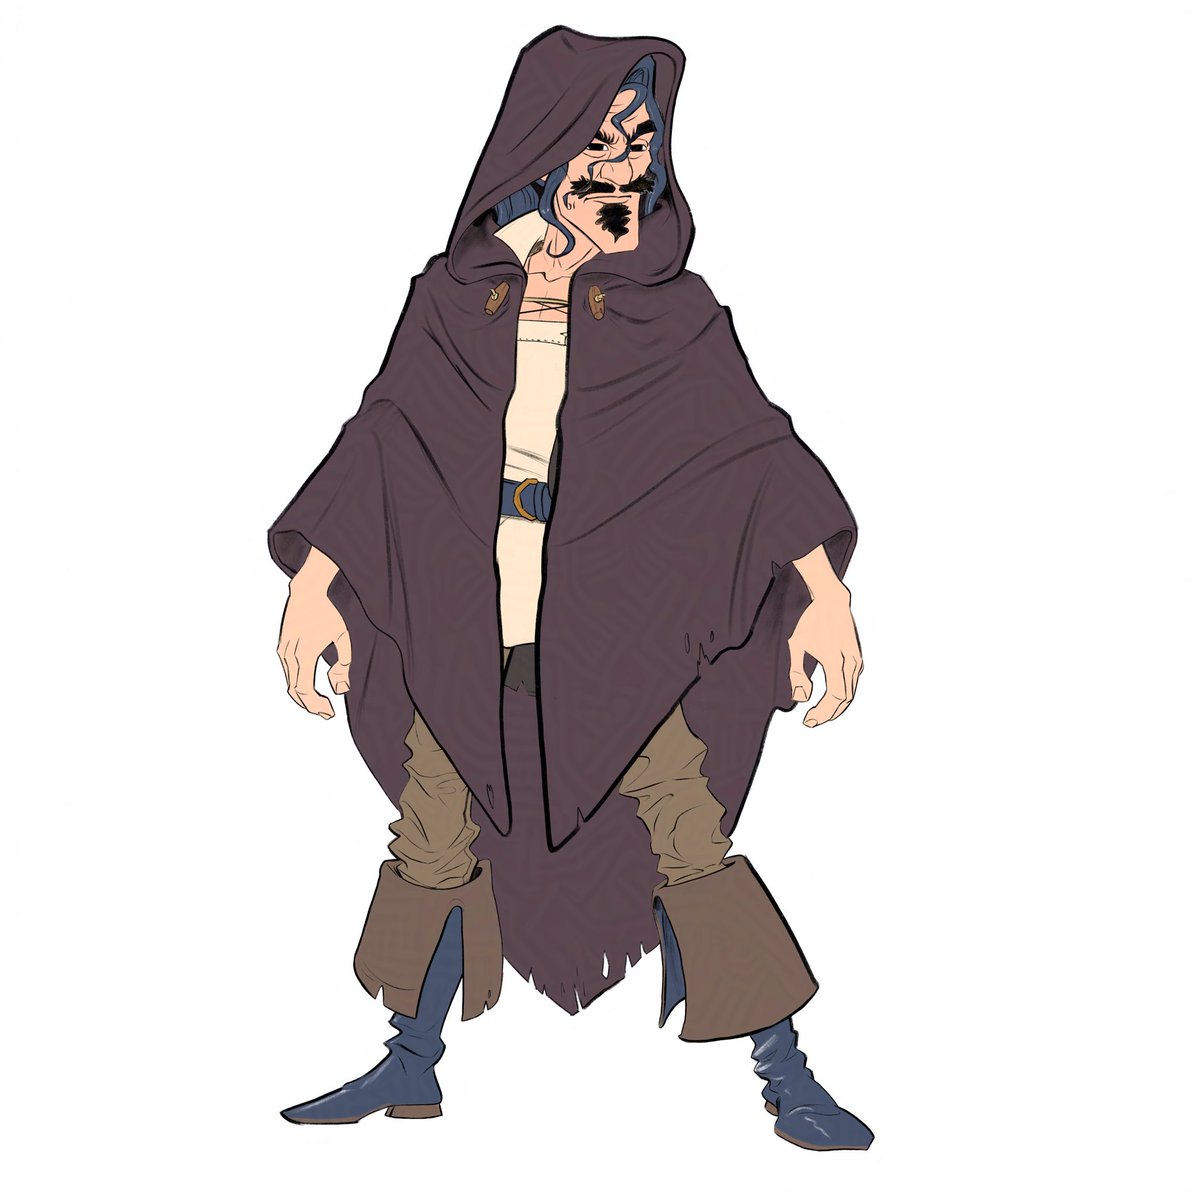 Another completely different #WingfeatherSaga #characterdesign : this was my take on the mysterious freedom fighter Gammon, who for mysterious reasons ALSO looked more like Inego Montoya, less like the Dread Pirate Wesley 😄